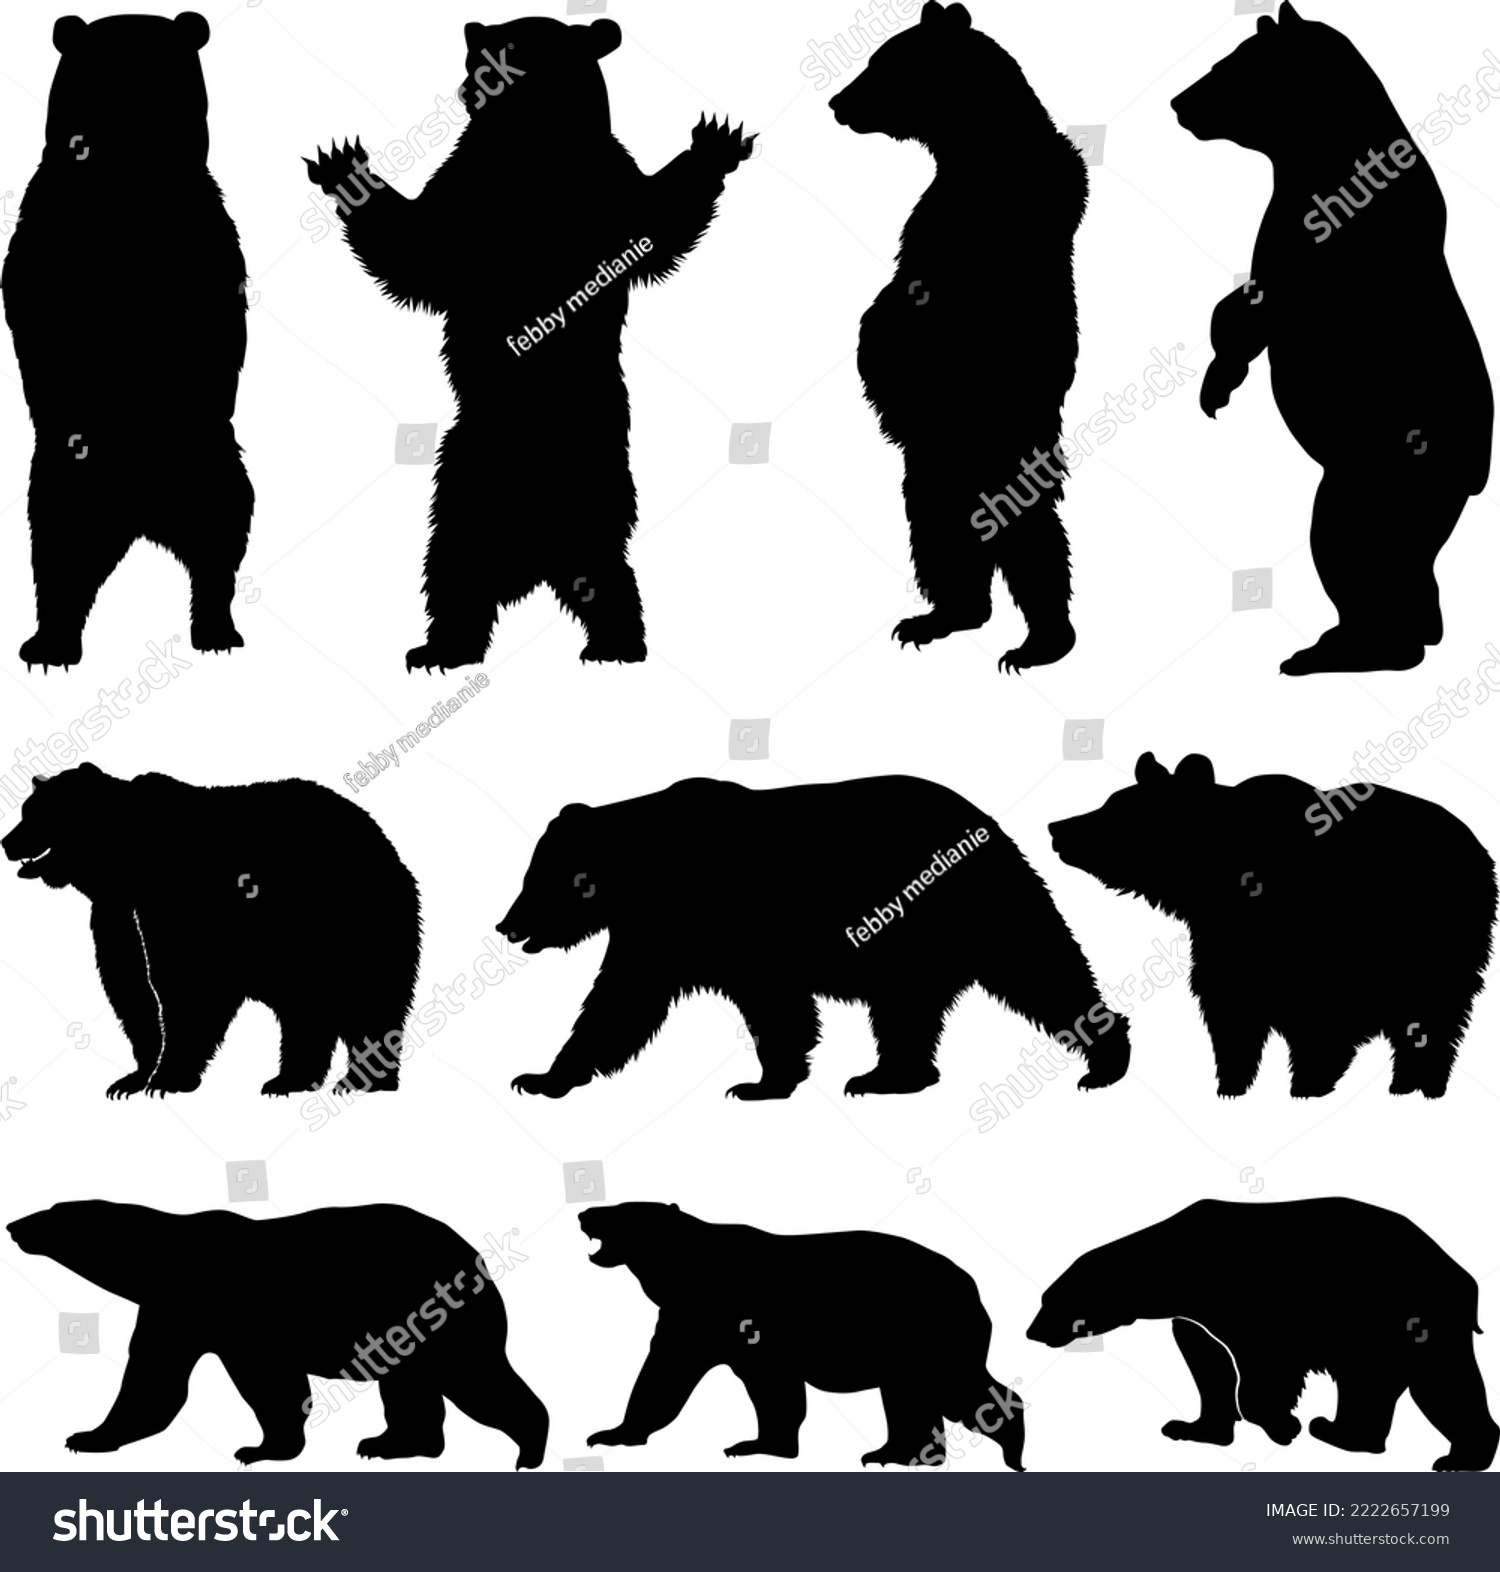 SVG of Vector silhouette bear, various bear silhouettes on the white background, Brown grizzly bear and polar bear silhouette set svg